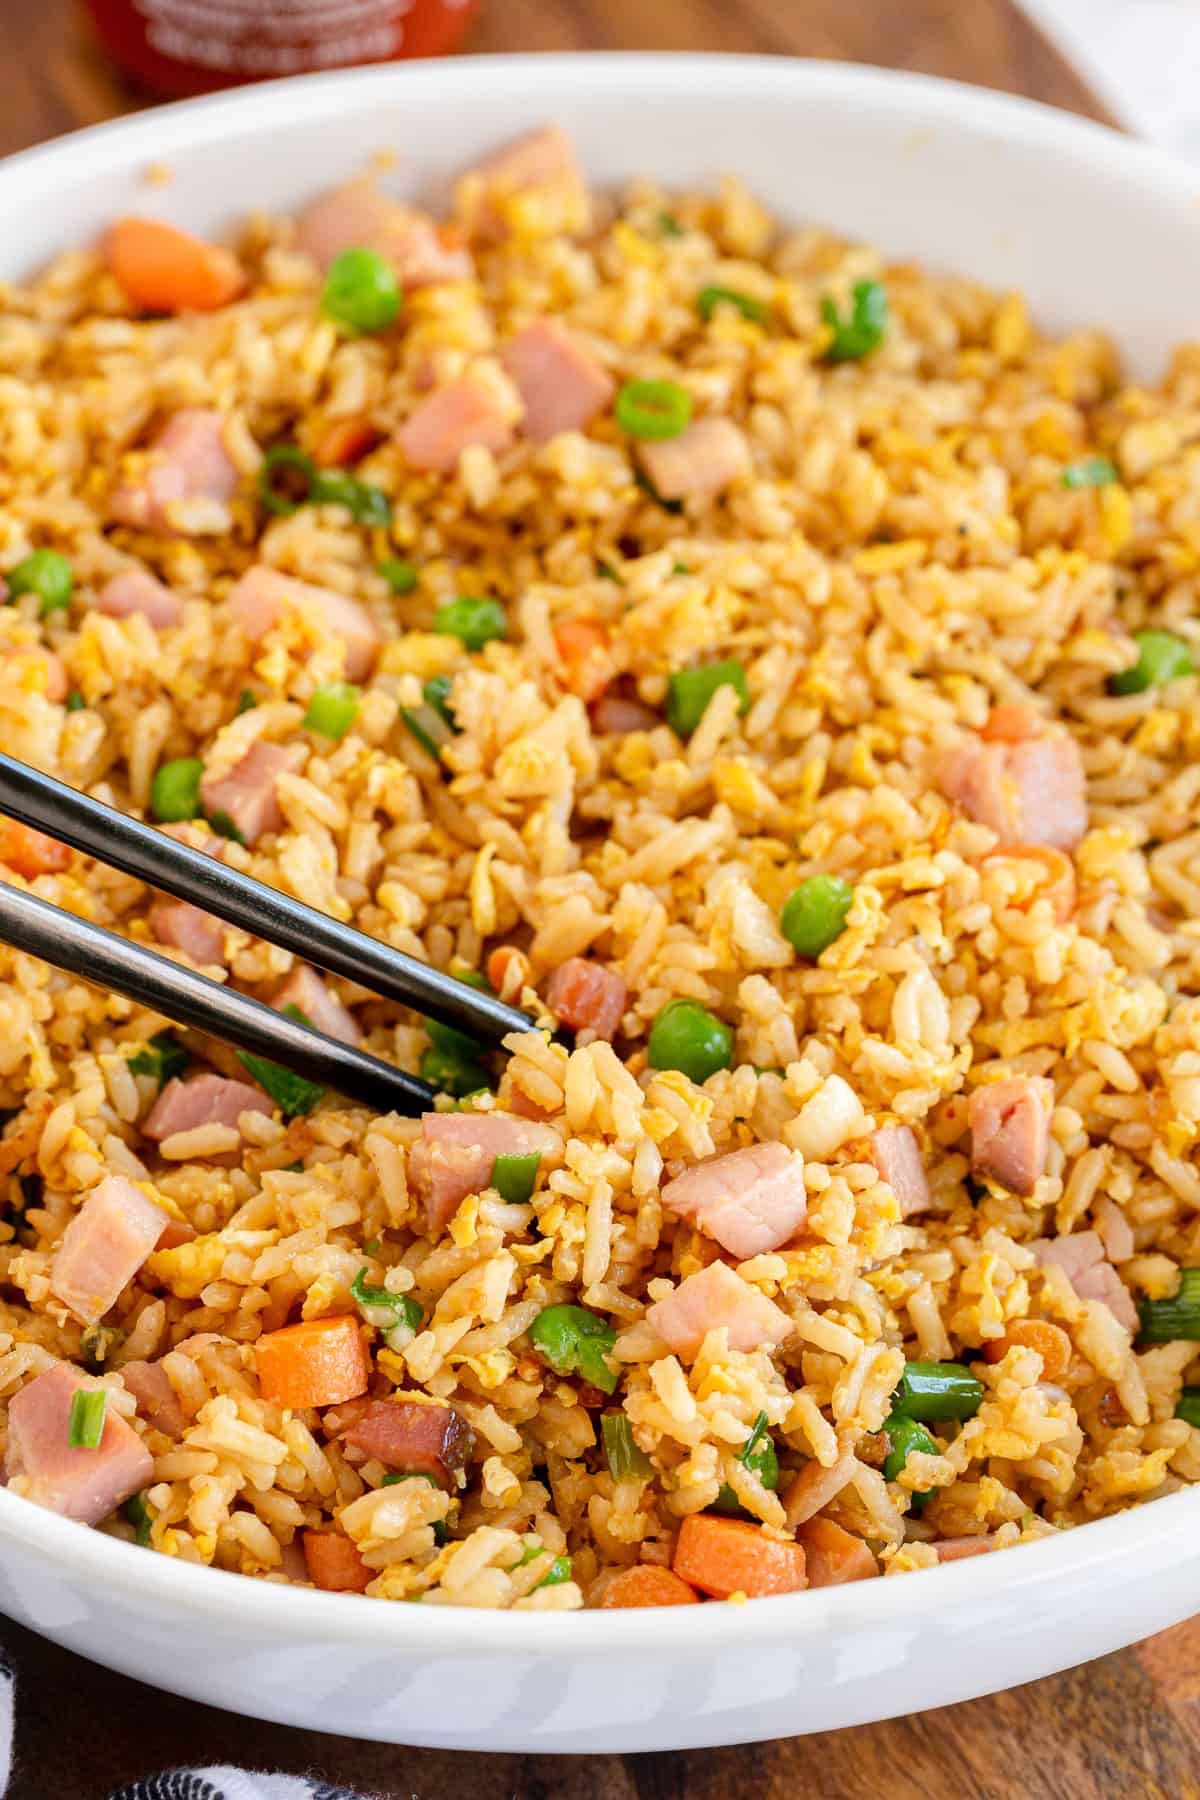 Chopsticks dig in to a bowl of fried rice with ham.